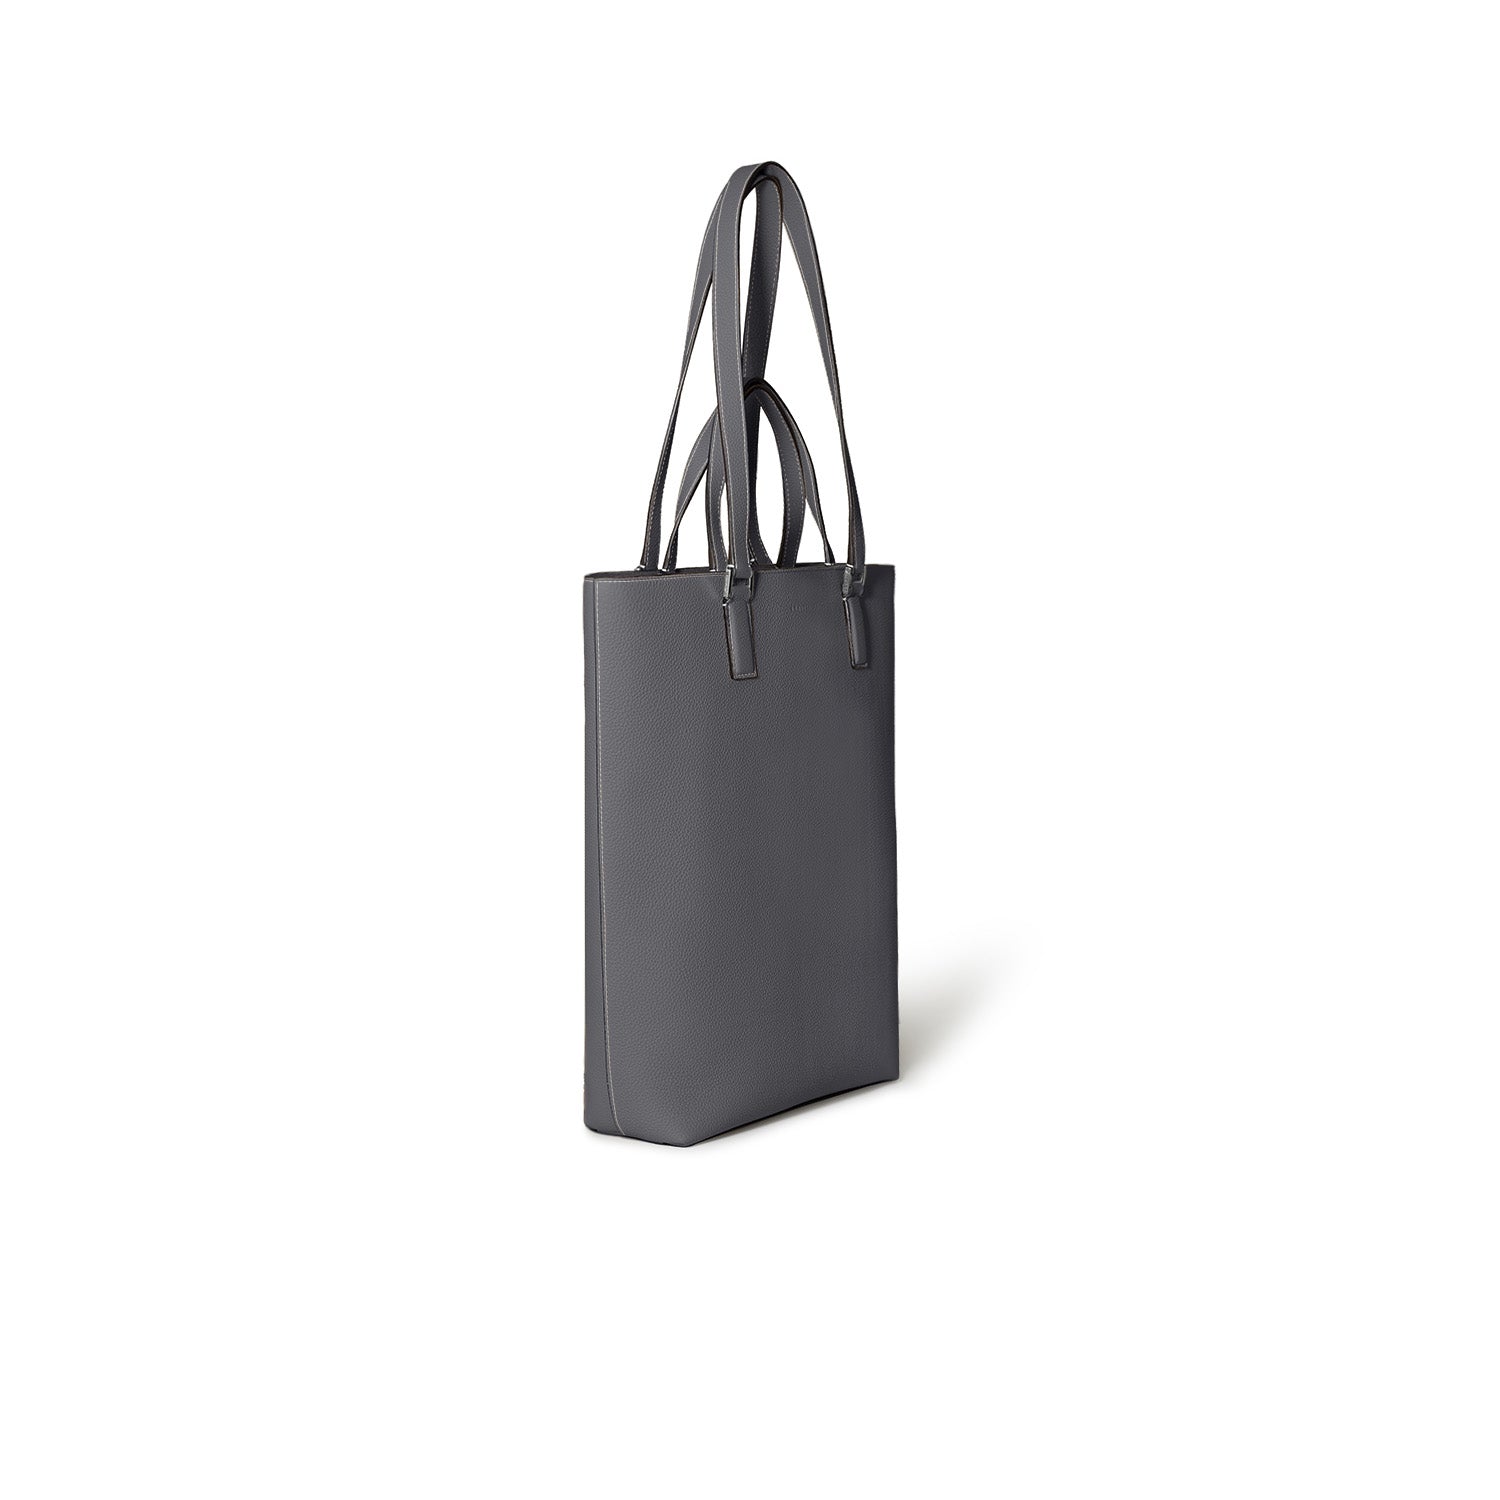 Cleo Tote Bag in Shrink Leather